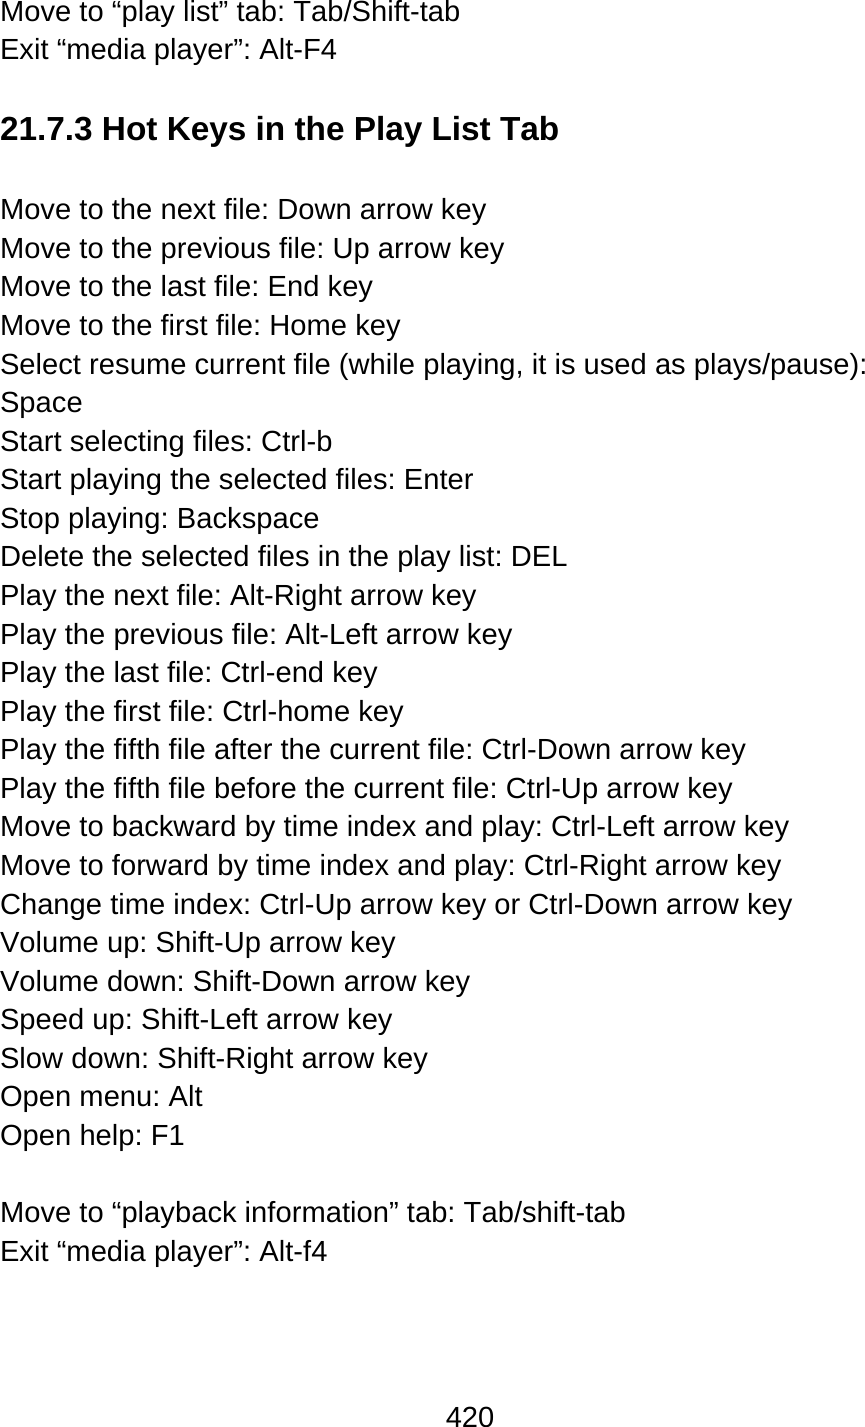 420  Move to “play list” tab: Tab/Shift-tab Exit “media player”: Alt-F4    21.7.3 Hot Keys in the Play List Tab  Move to the next file: Down arrow key Move to the previous file: Up arrow key Move to the last file: End key Move to the first file: Home key Select resume current file (while playing, it is used as plays/pause):   Space Start selecting files: Ctrl-b Start playing the selected files: Enter Stop playing: Backspace Delete the selected files in the play list: DEL Play the next file: Alt-Right arrow key Play the previous file: Alt-Left arrow key Play the last file: Ctrl-end key Play the first file: Ctrl-home key   Play the fifth file after the current file: Ctrl-Down arrow key Play the fifth file before the current file: Ctrl-Up arrow key Move to backward by time index and play: Ctrl-Left arrow key Move to forward by time index and play: Ctrl-Right arrow key Change time index: Ctrl-Up arrow key or Ctrl-Down arrow key Volume up: Shift-Up arrow key Volume down: Shift-Down arrow key Speed up: Shift-Left arrow key Slow down: Shift-Right arrow key Open menu: Alt Open help: F1  Move to “playback information” tab: Tab/shift-tab Exit “media player”: Alt-f4     